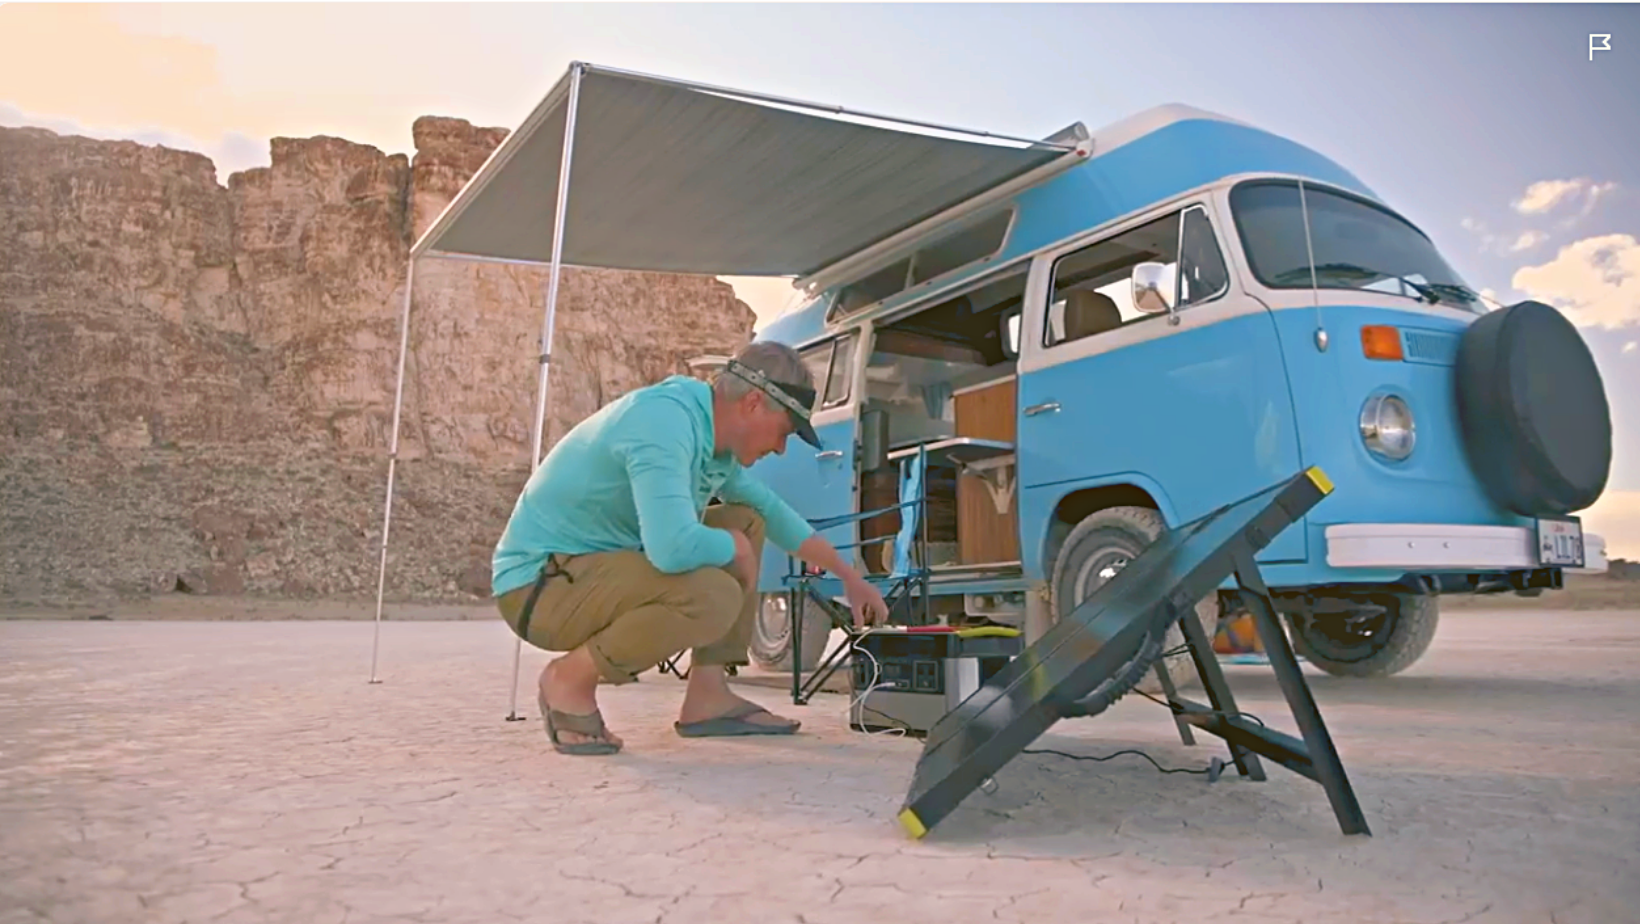 What Are The Best Solar Generators For Camper Vans, RVs, or Off-Grid?